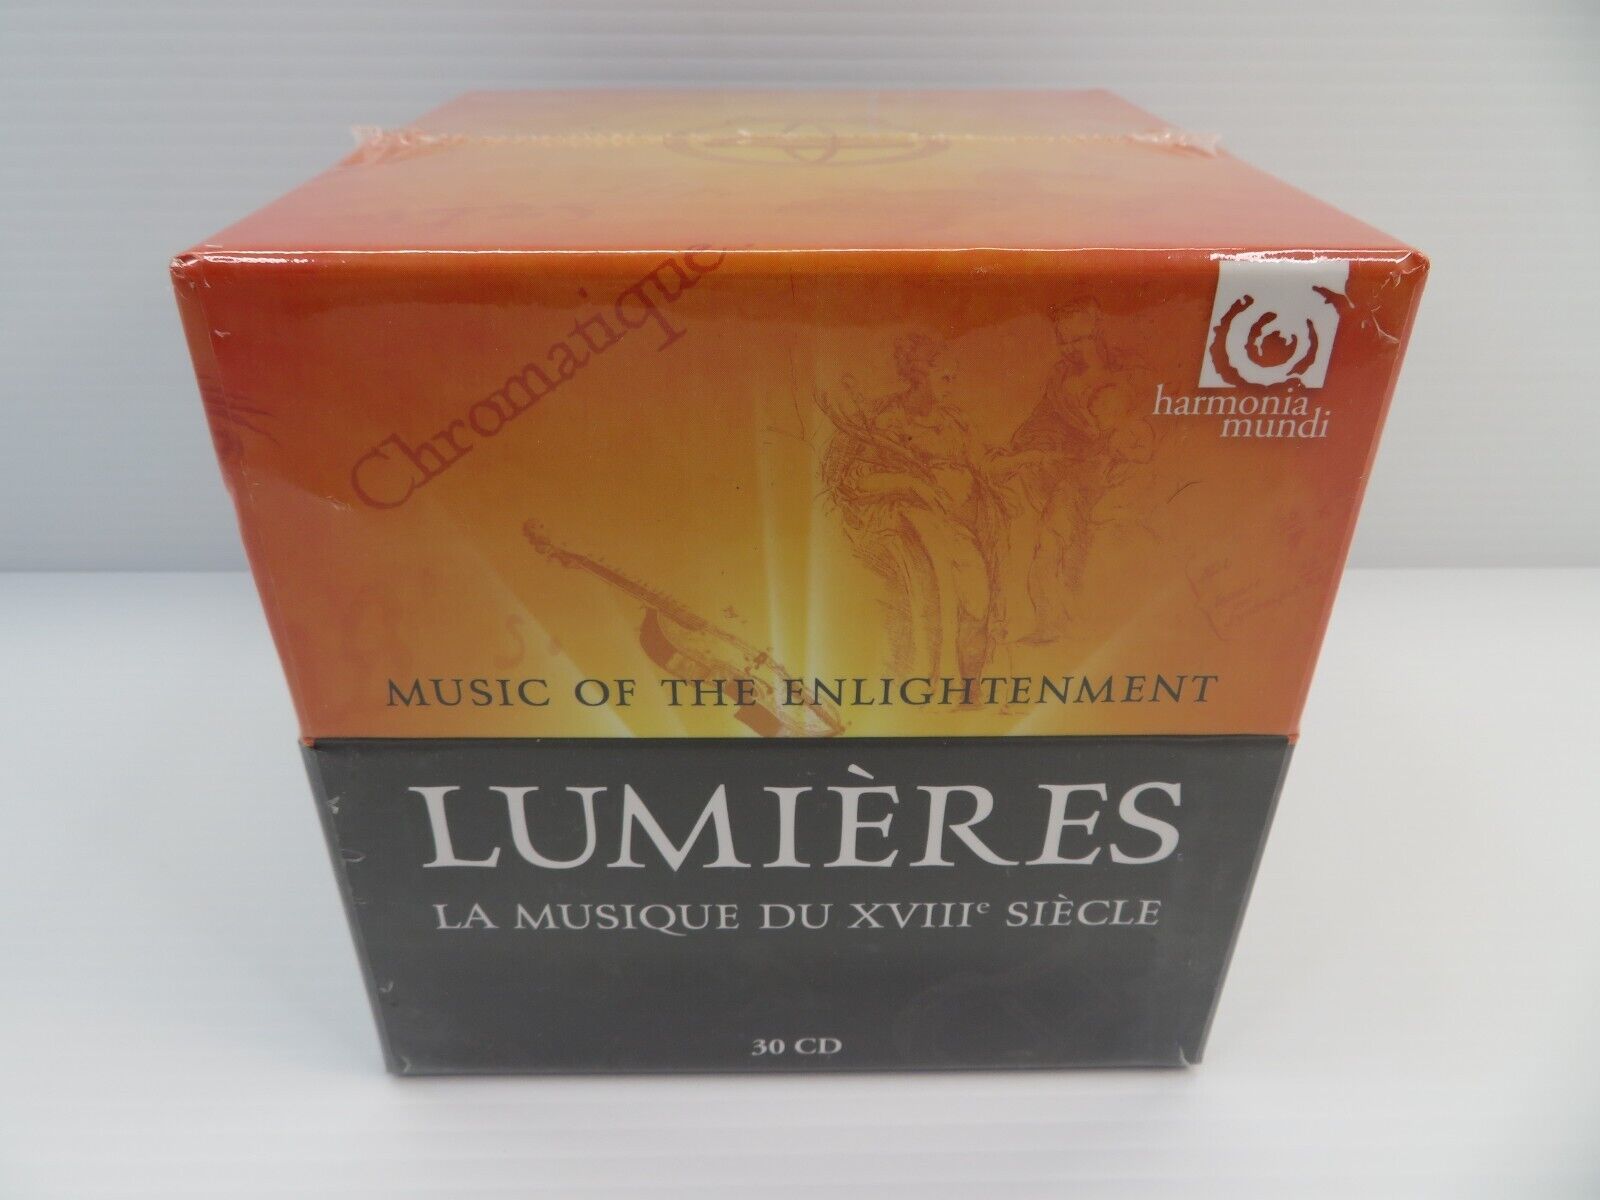 Lumieres 18th Century The Age Of Music Of The Enlightenment 30CD Set - Brand New